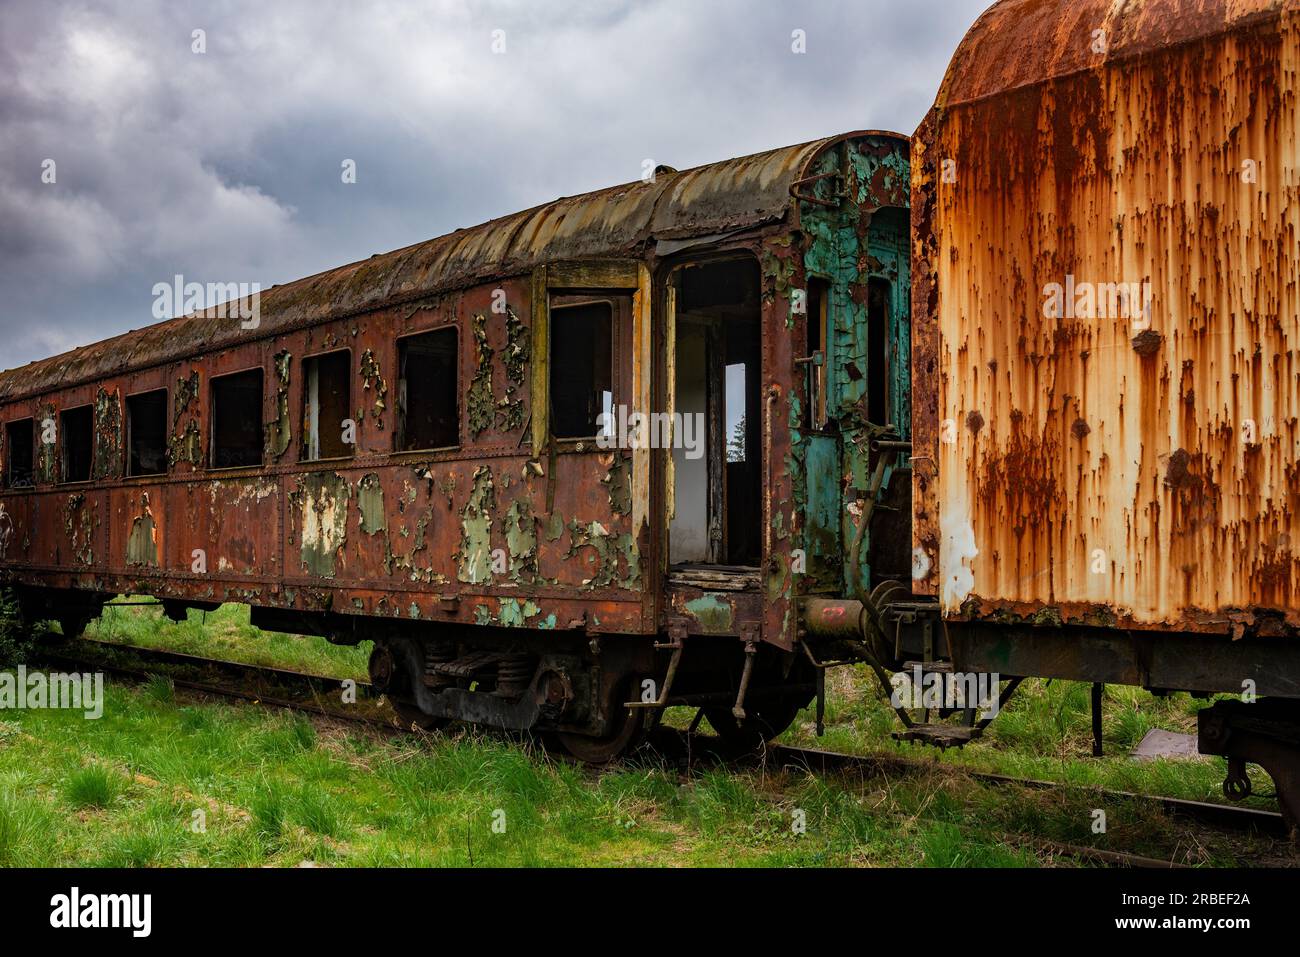 Old rusty passenger railway carriage abandoned on train cemetary field Stock Photo